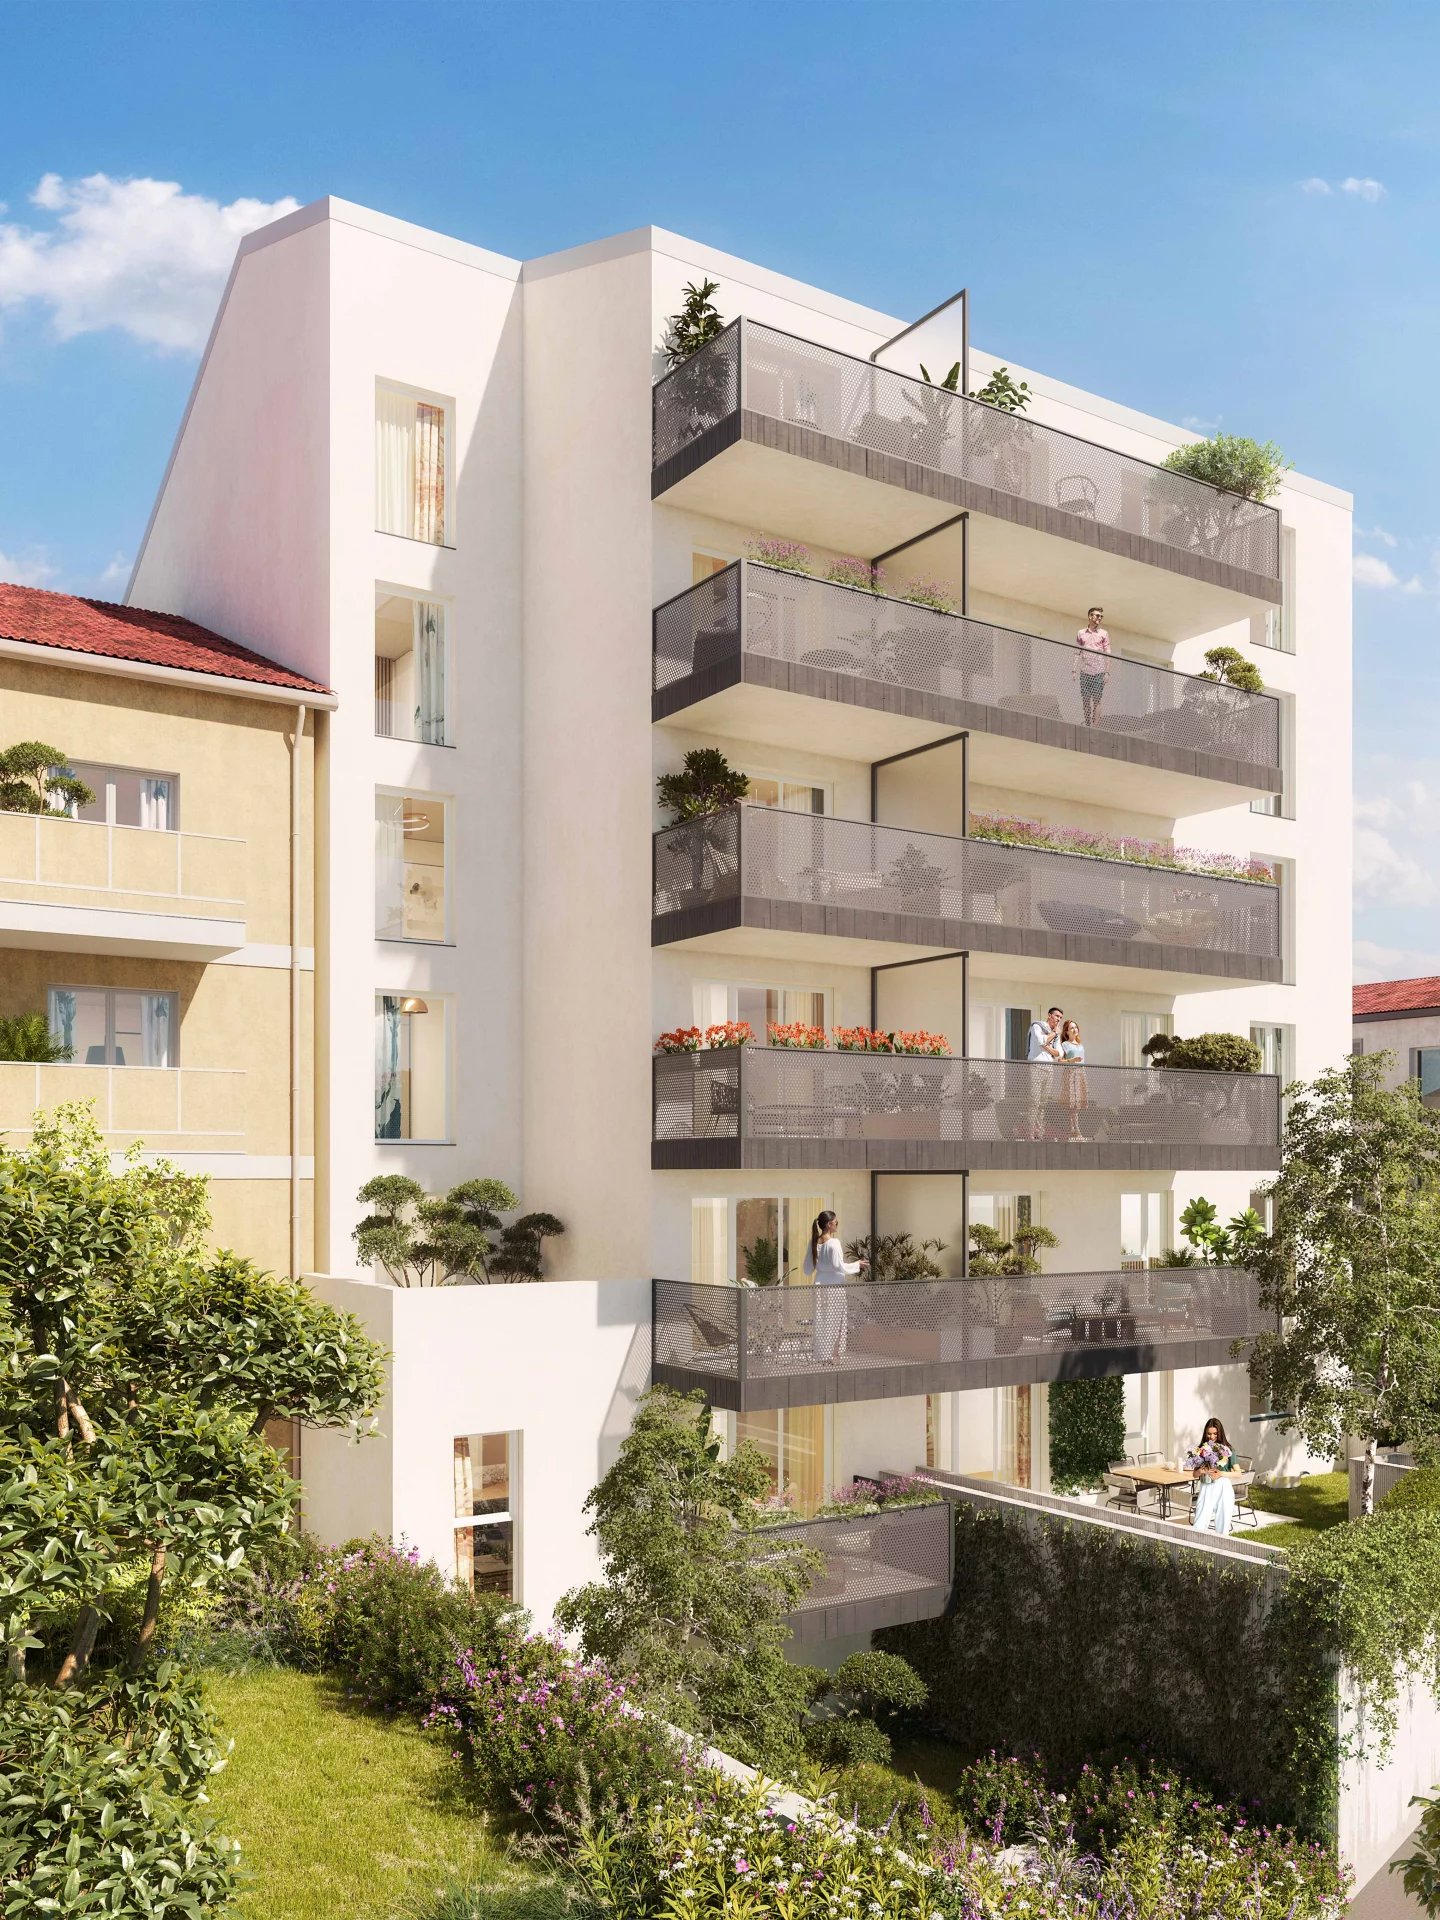 New construction of luxury apartments in Nice center Est.